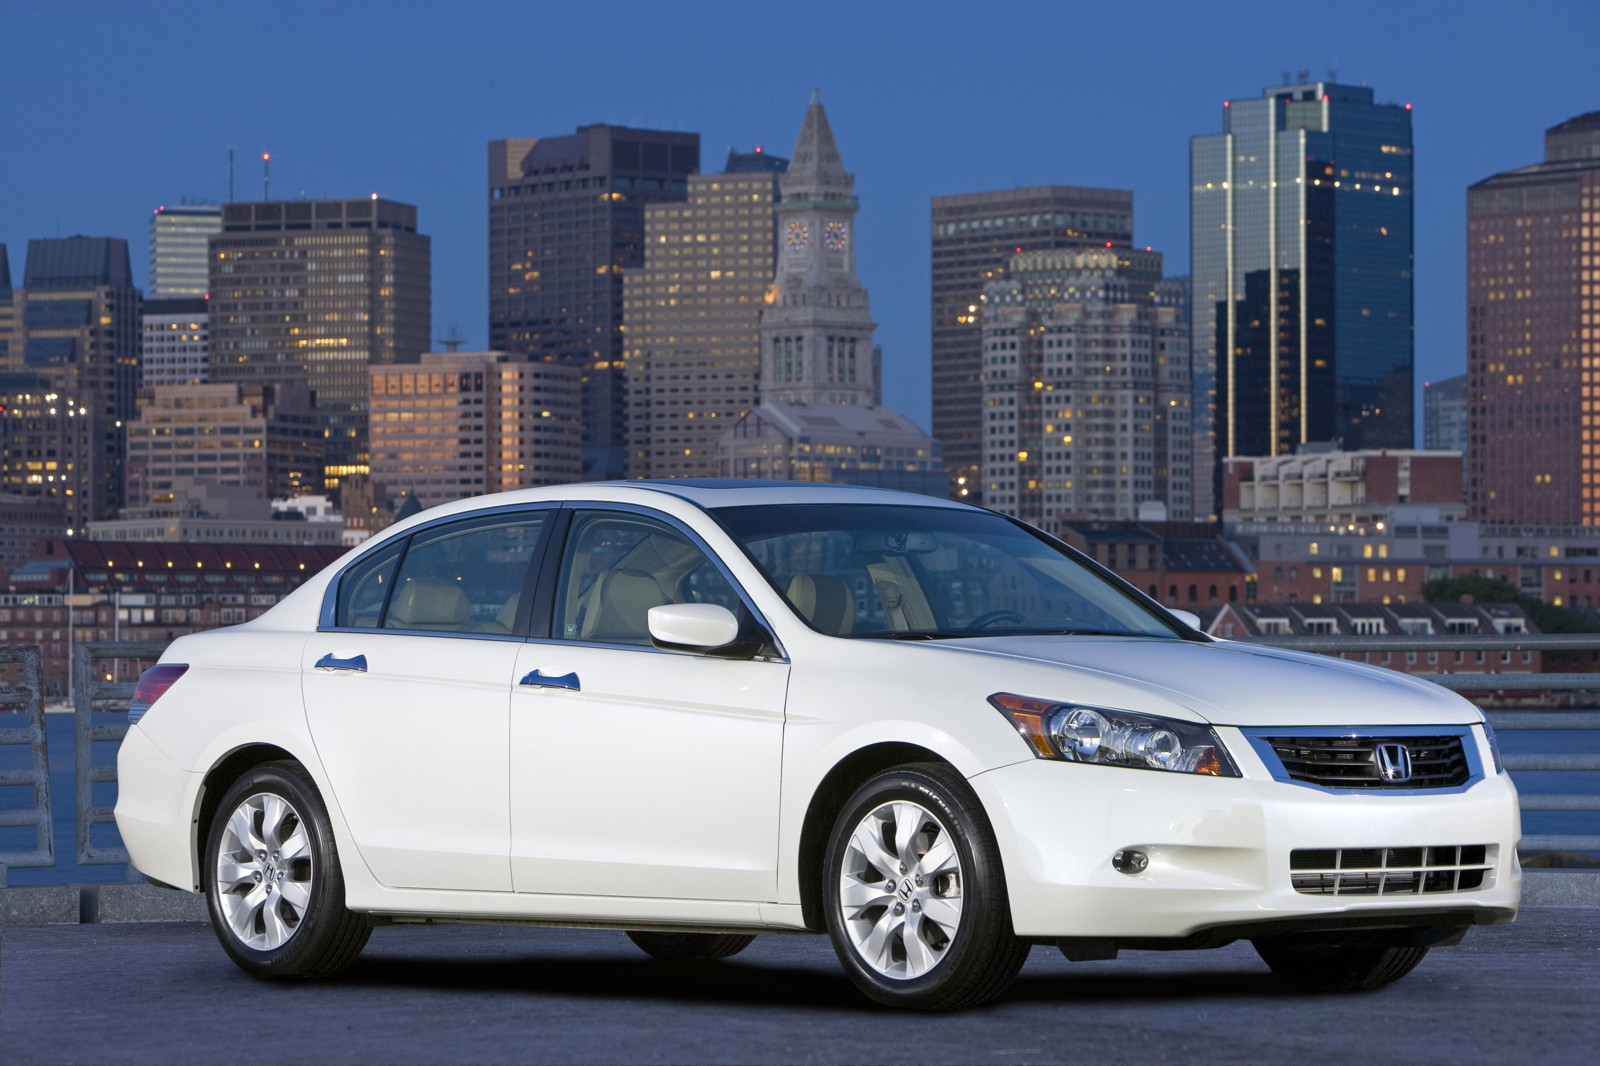 2010 Honda Accord Sedan Review, Ratings, Specs, Prices, and Photos ...